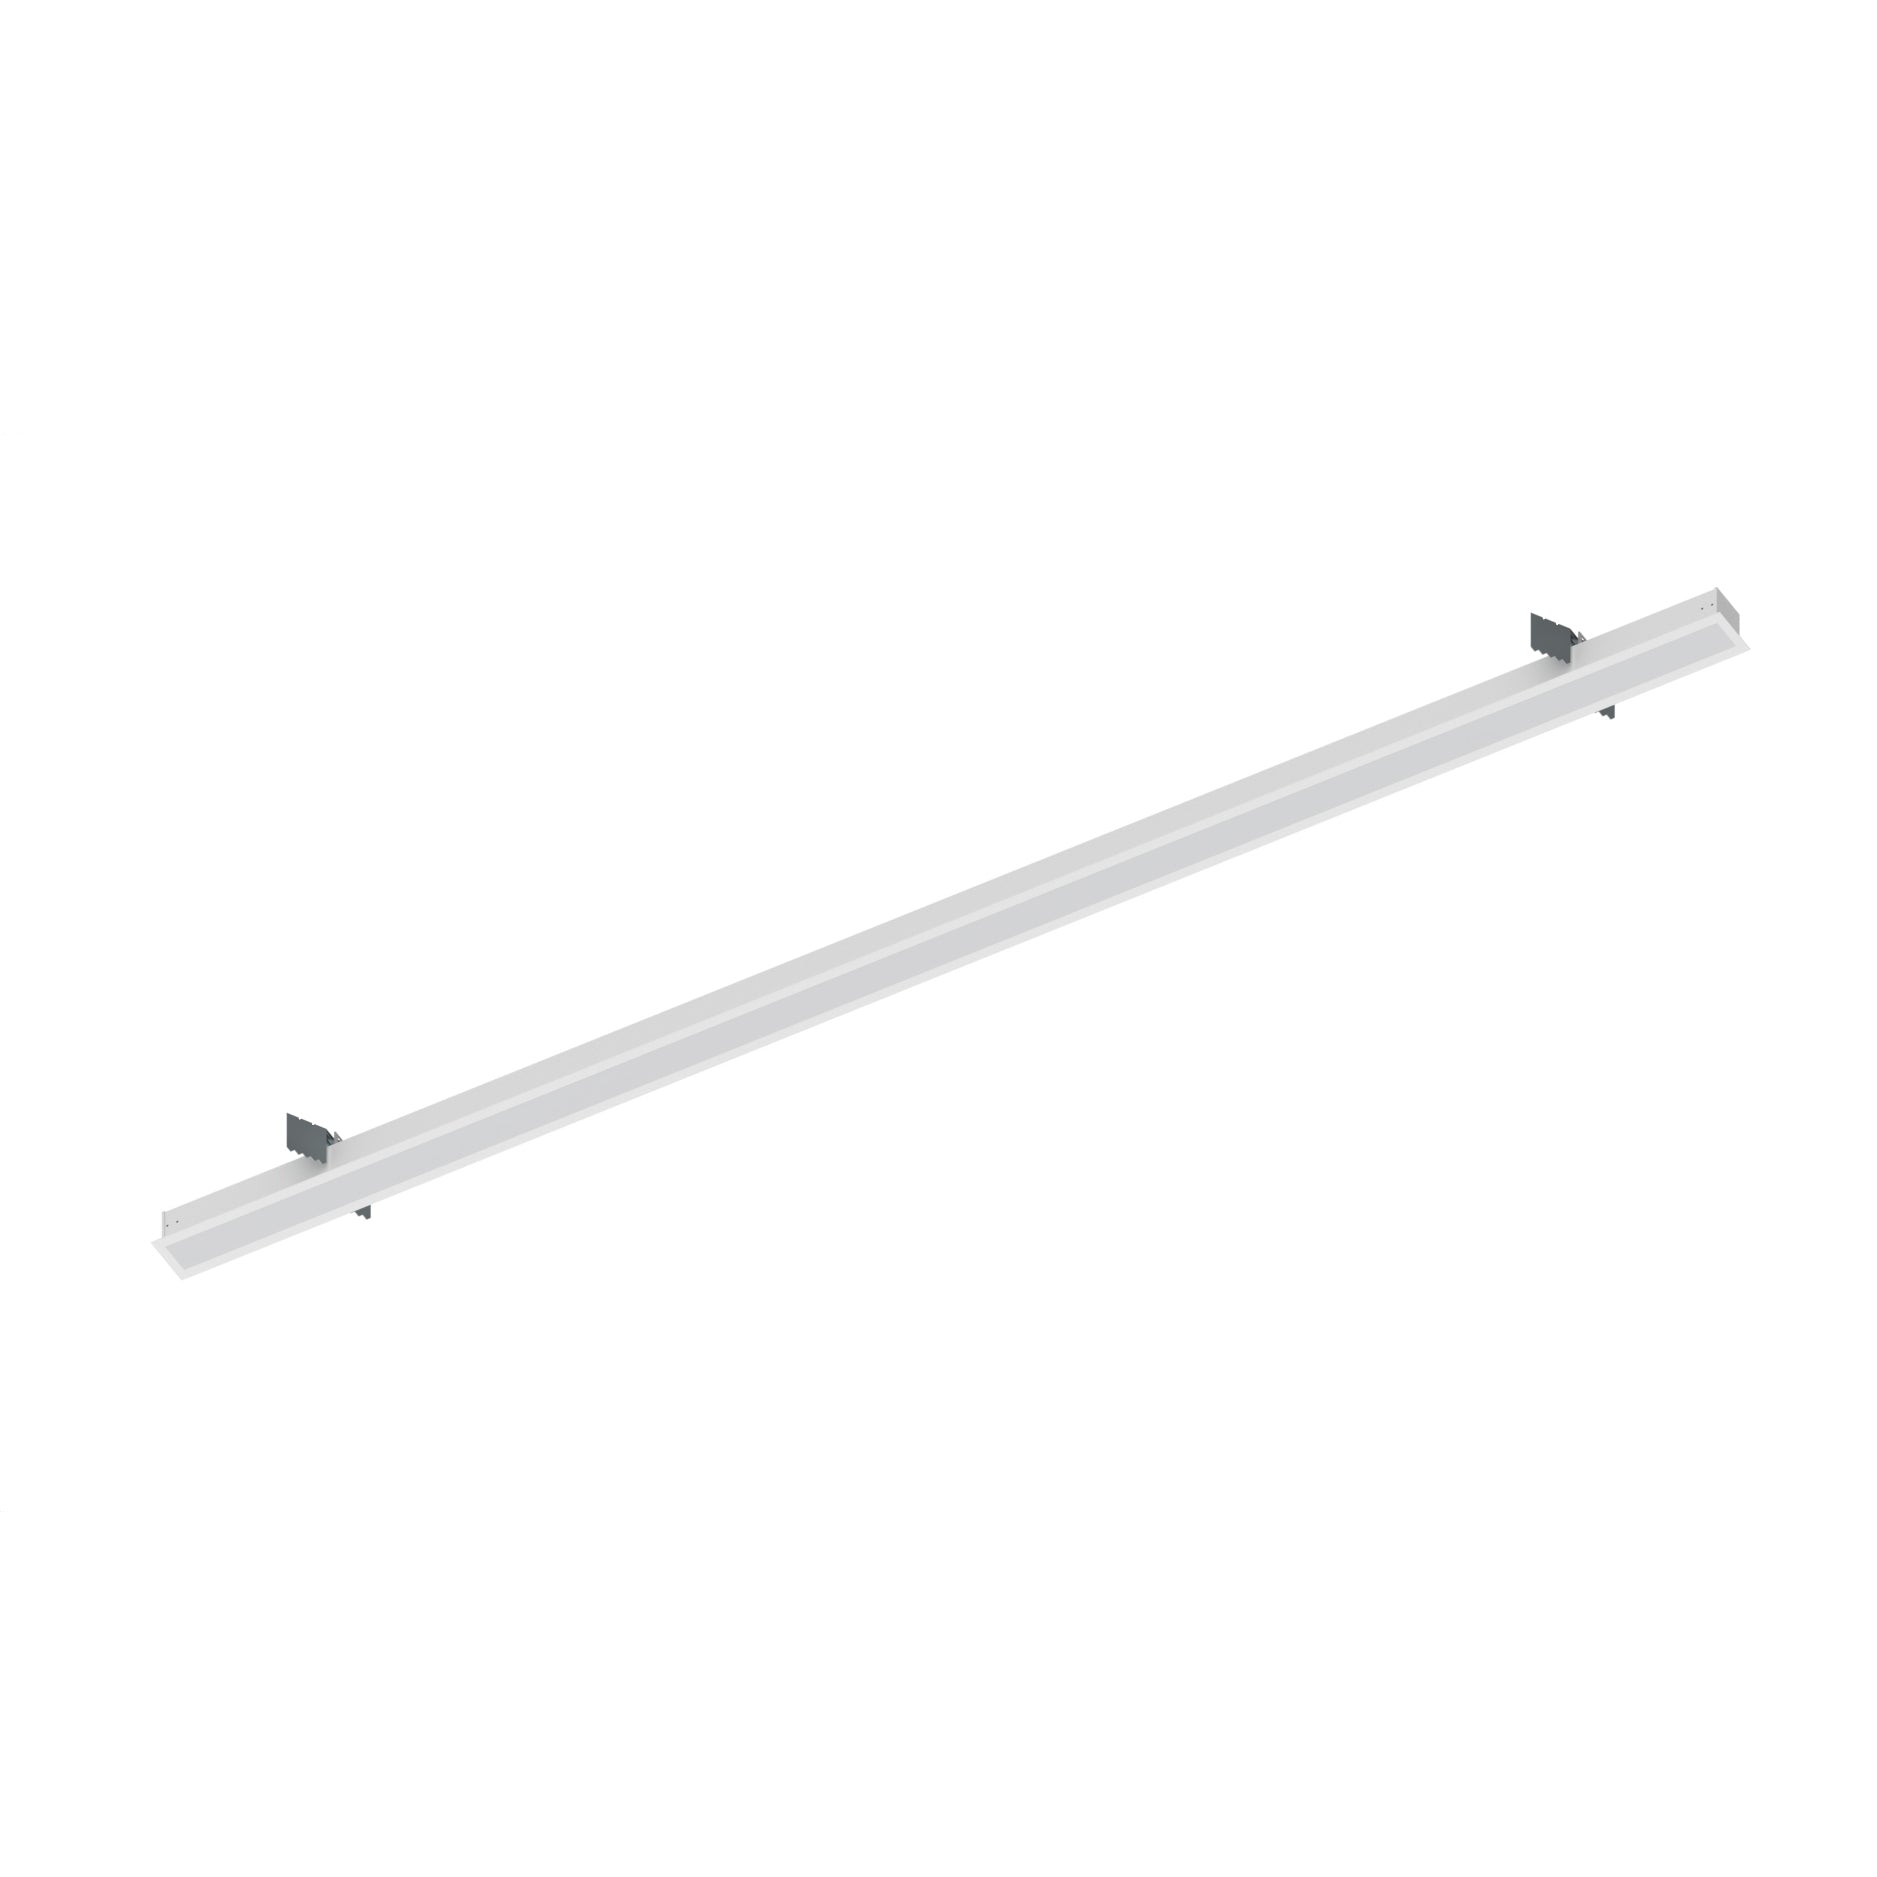 Nora Lighting NRLIN-81035W - Linear - 8' L-Line LED Recessed Linear, 8400lm / 3500K, White Finish